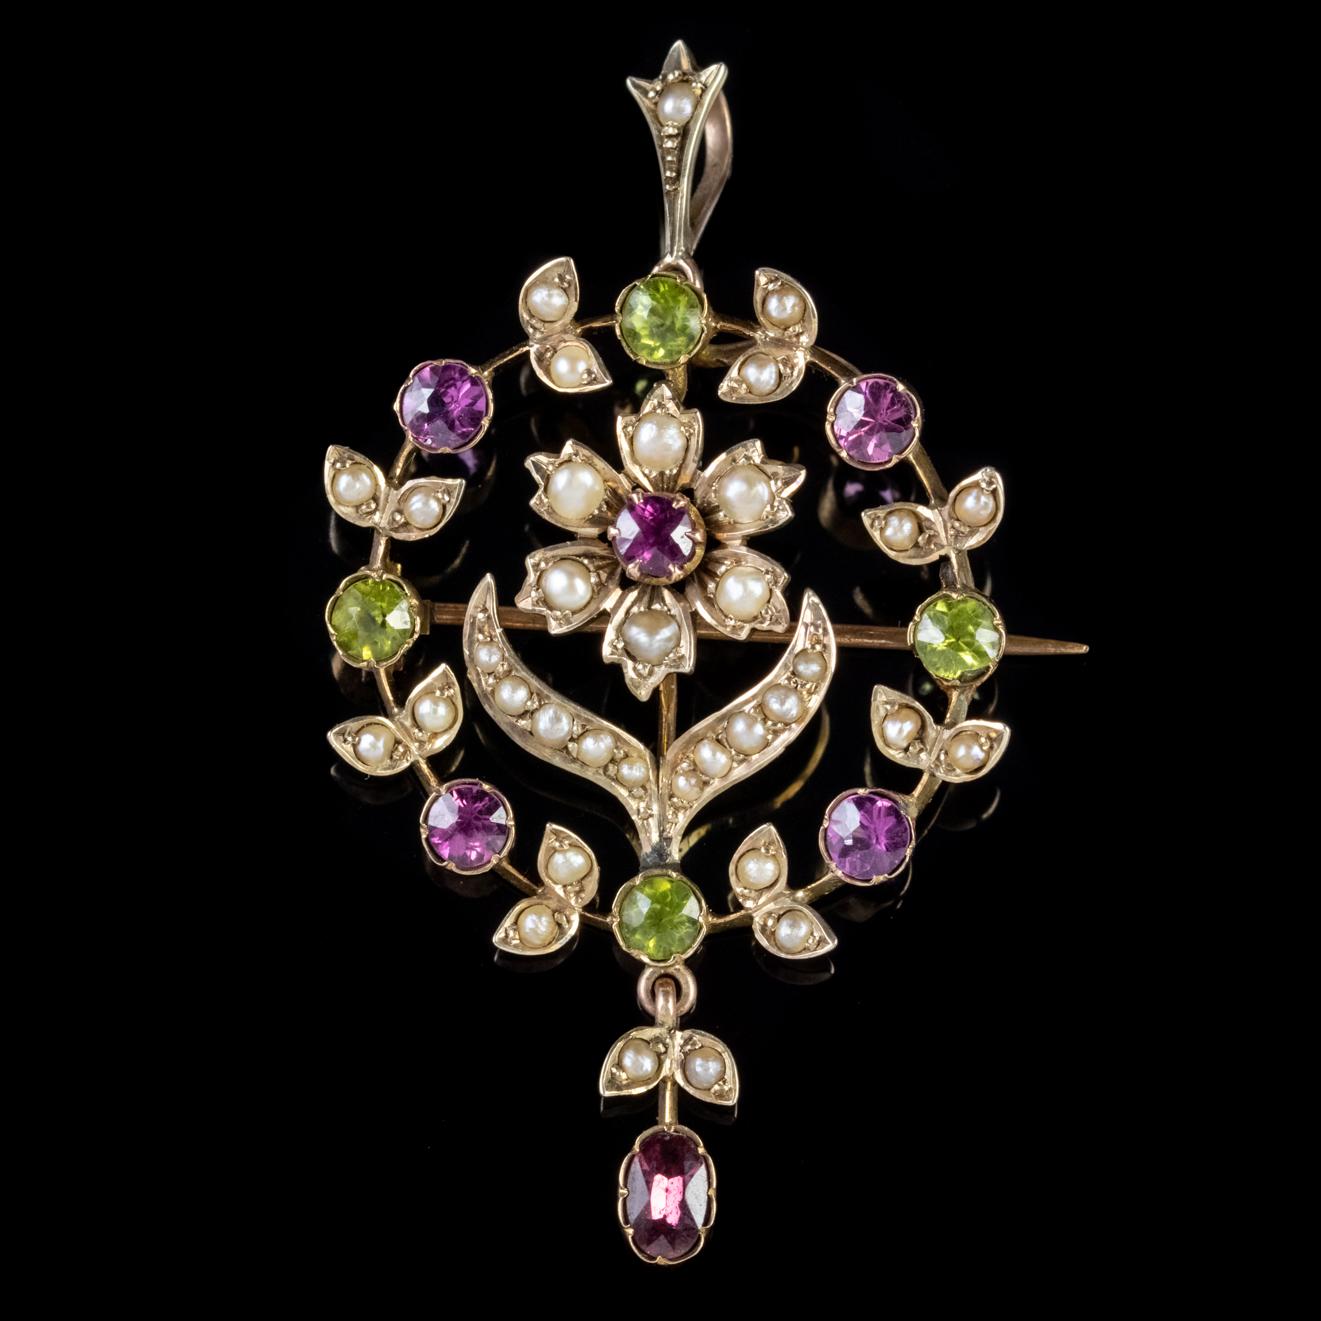 A fabulous Antique Suffragette pendant made Circa 1910. The piece depicts a beautiful wreath encircling a central flower decorated with a colourful array of Peridots, Pearls and Amethysts with a fancy dropper hanging below. 

Suffragettes liked to